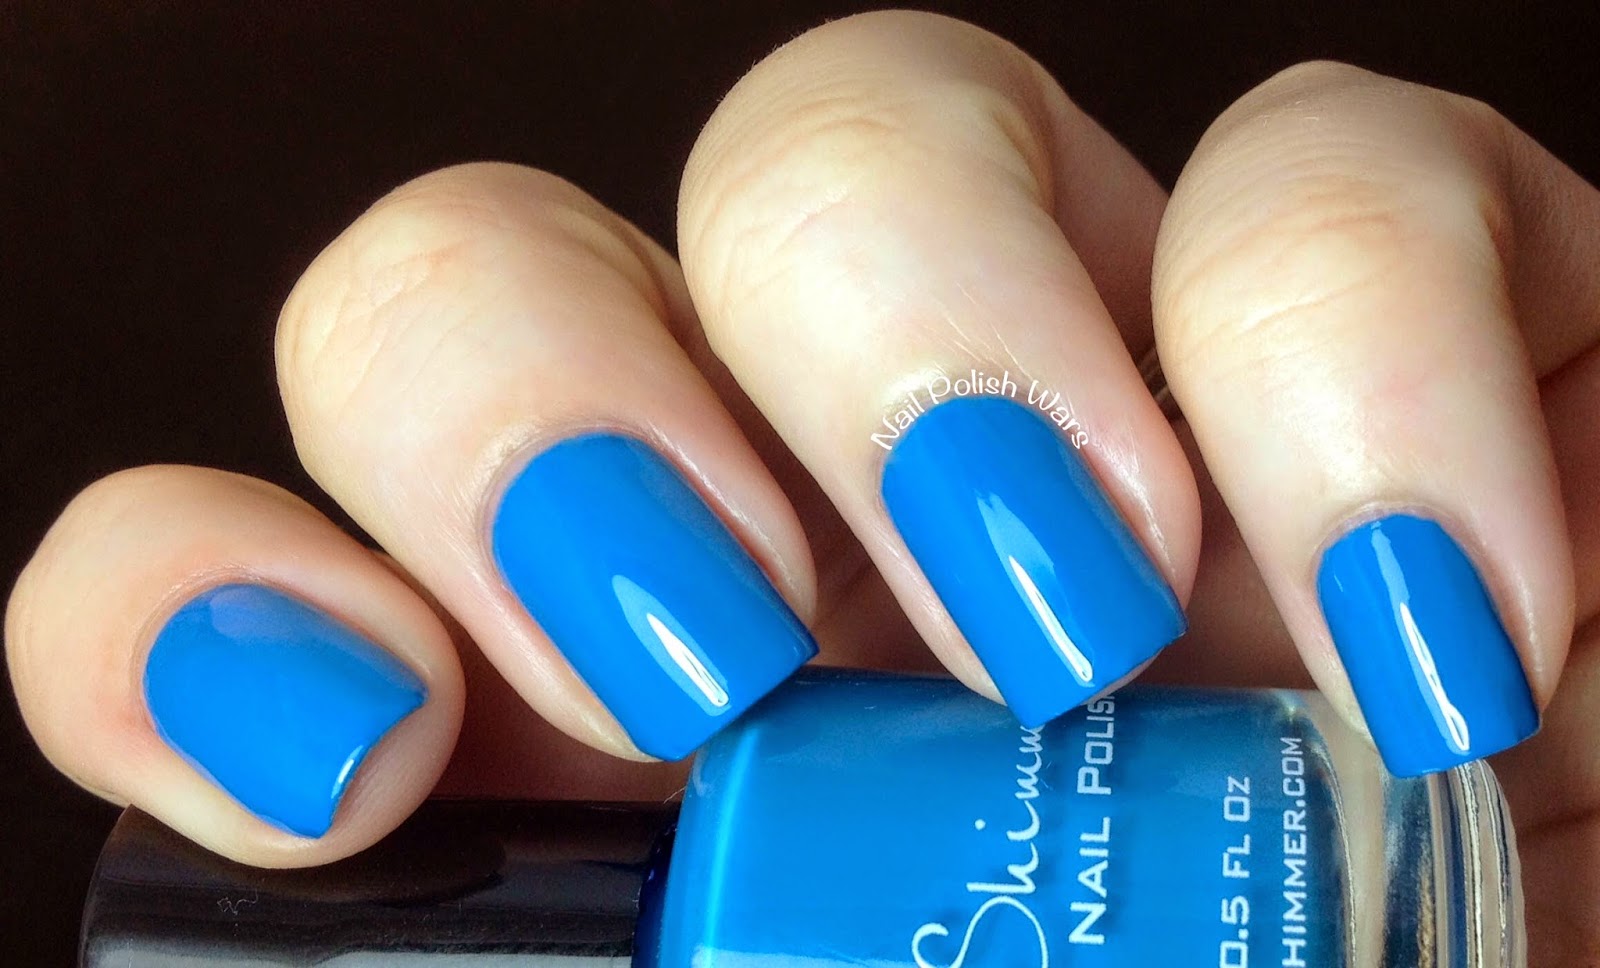 Nail Polish Wars: KBShimmer Spring 2014 Collection Swatch & Review Pt. 2